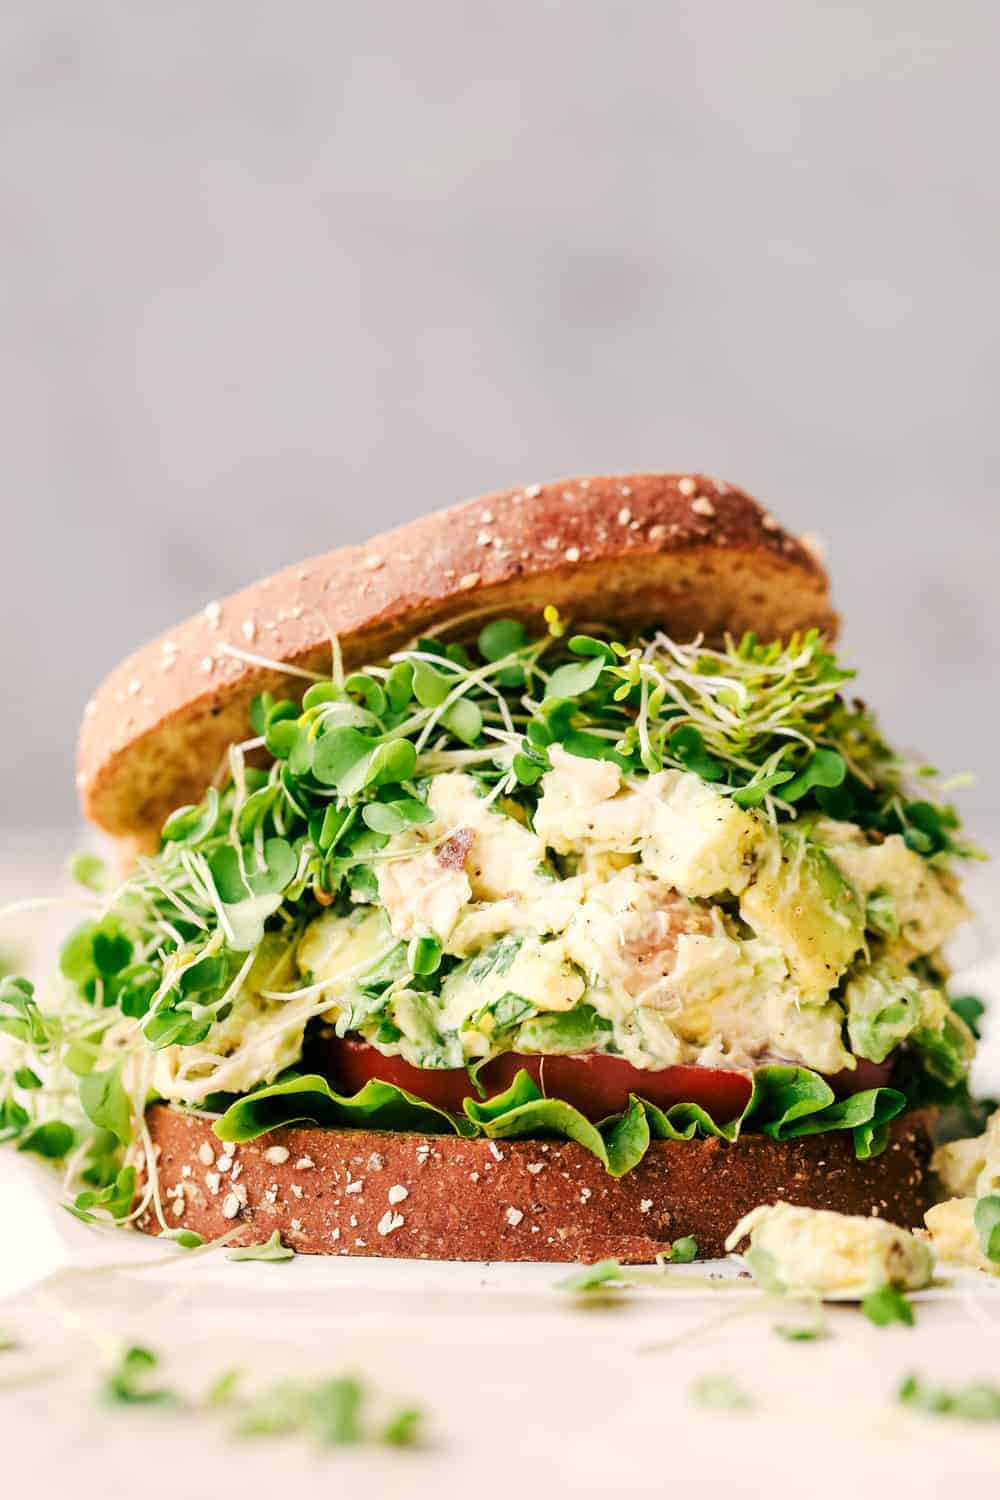 Calories In Chicken Salad Sandwich
 how many calories in a chicken salad sandwich on whole wheat